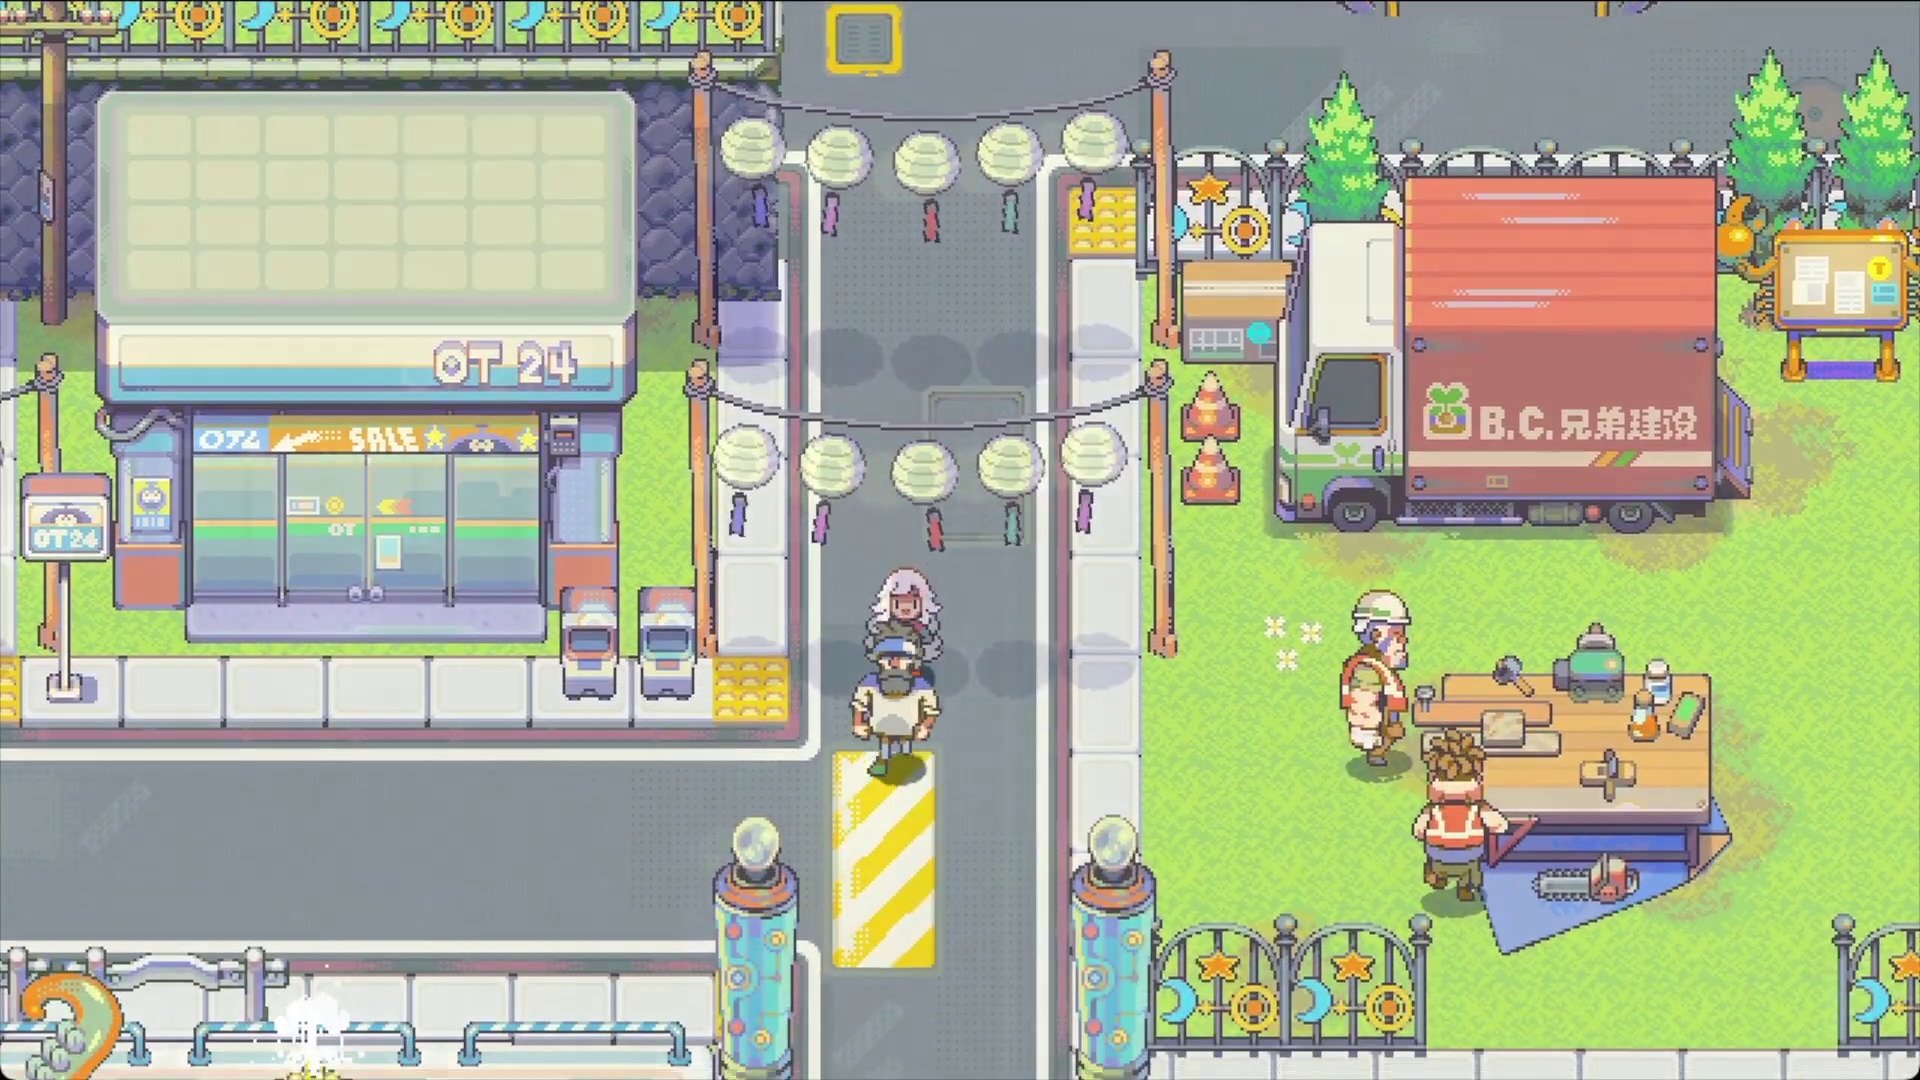 Eastward Will Be Getting A Physical Retail Release